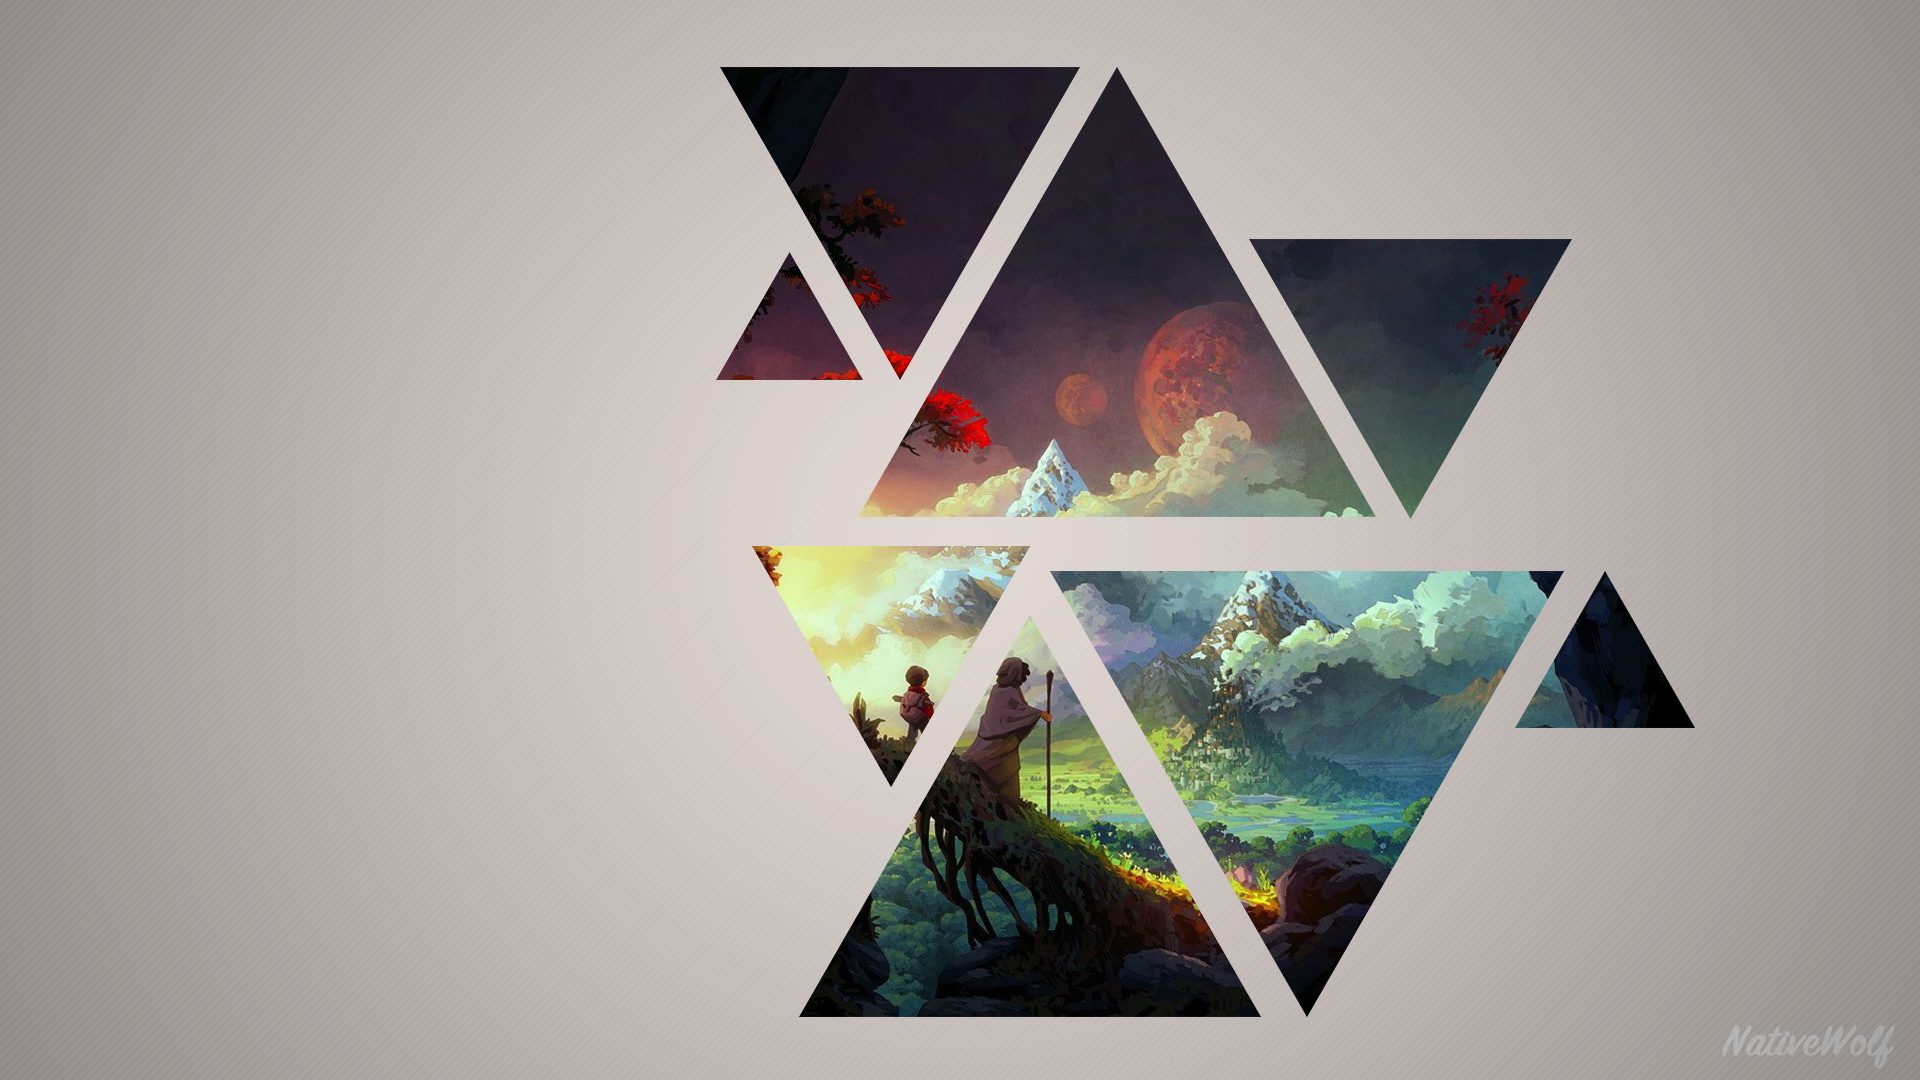 Anime 1920x1080 anime triangle fantasy art simple background collage gray background geometric figures watermarked